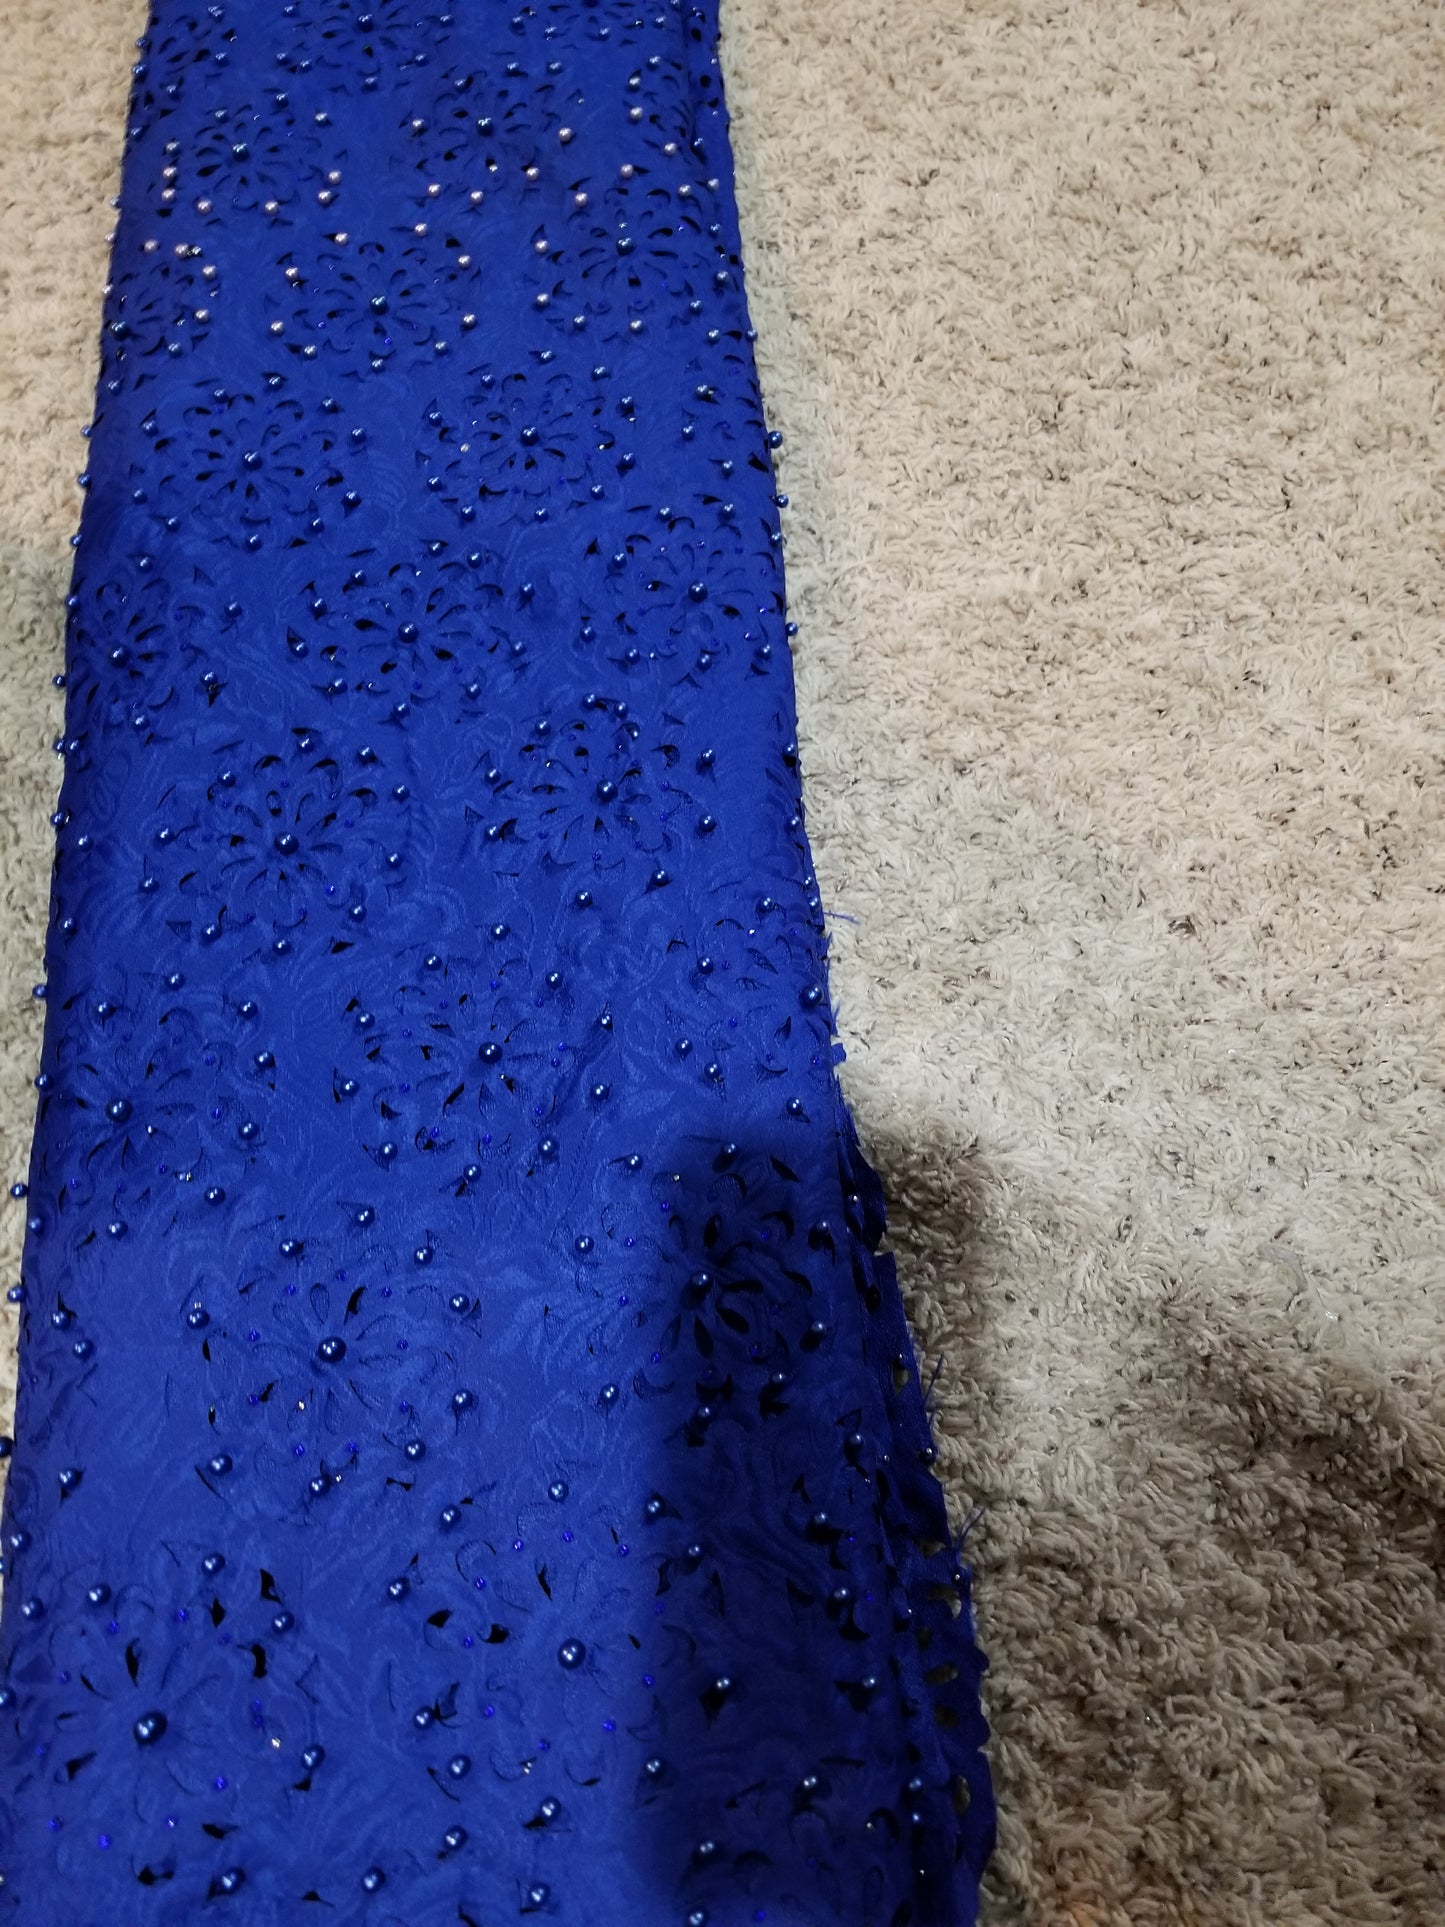 New arrival Laser Cut African French Lace fabric.  Top quality fabric Beaded  and stoned to perfection.  Sold per 5yds. Price is for 5yds. Nigerian party lace fabric for dresses